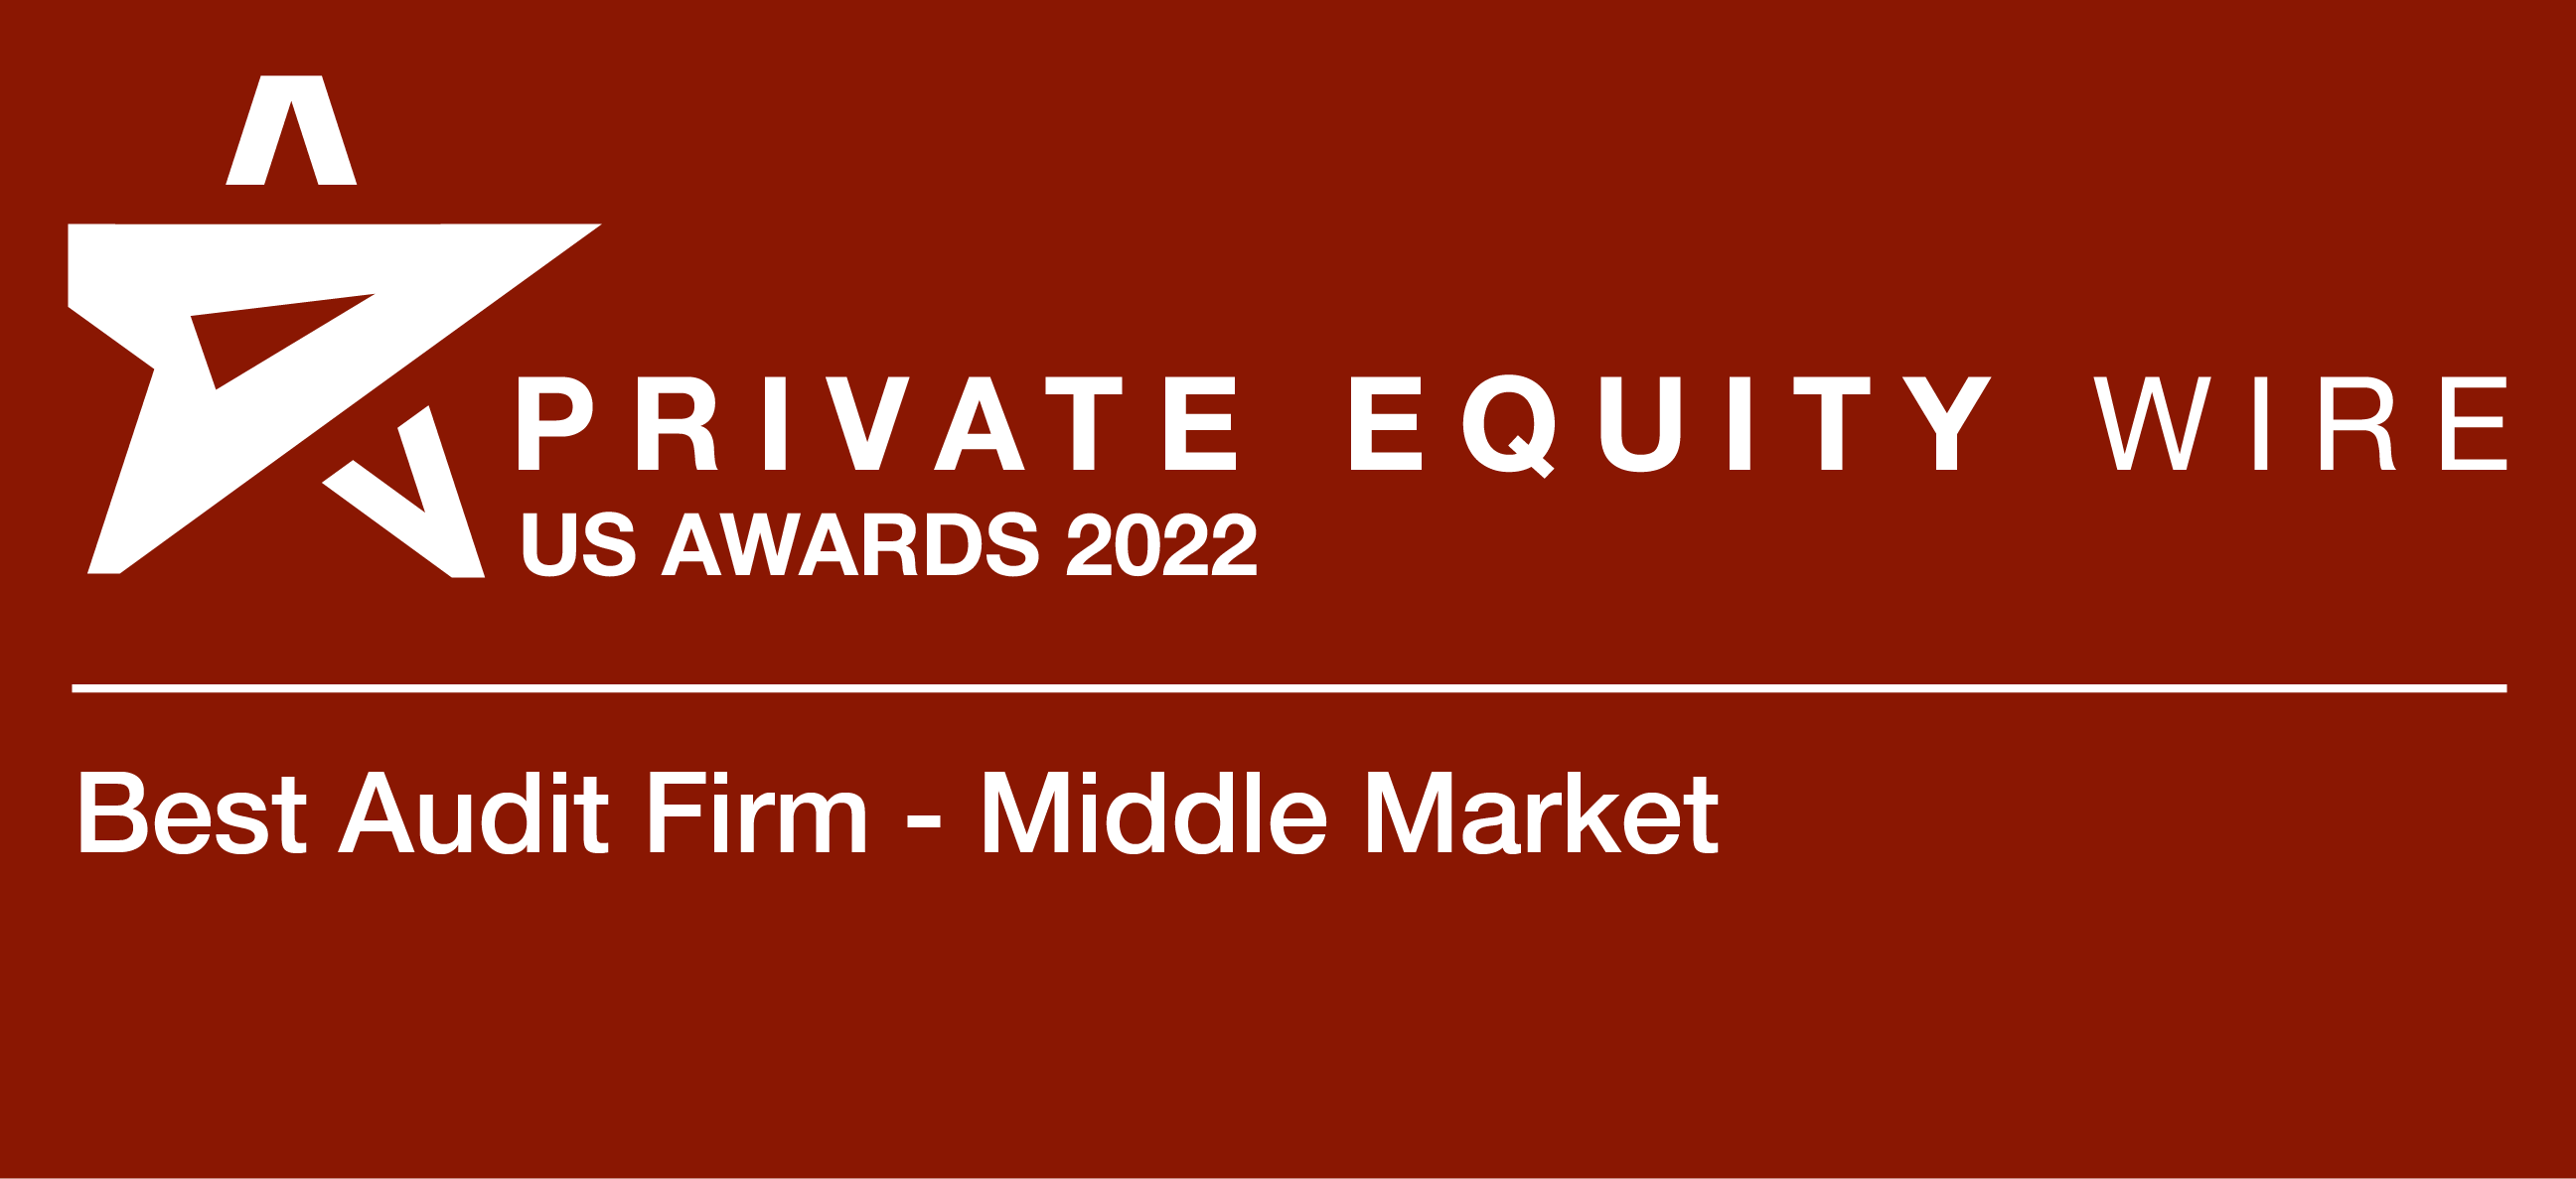 Private Equity Wire Best Audit Firm Middle Market 2022 logo